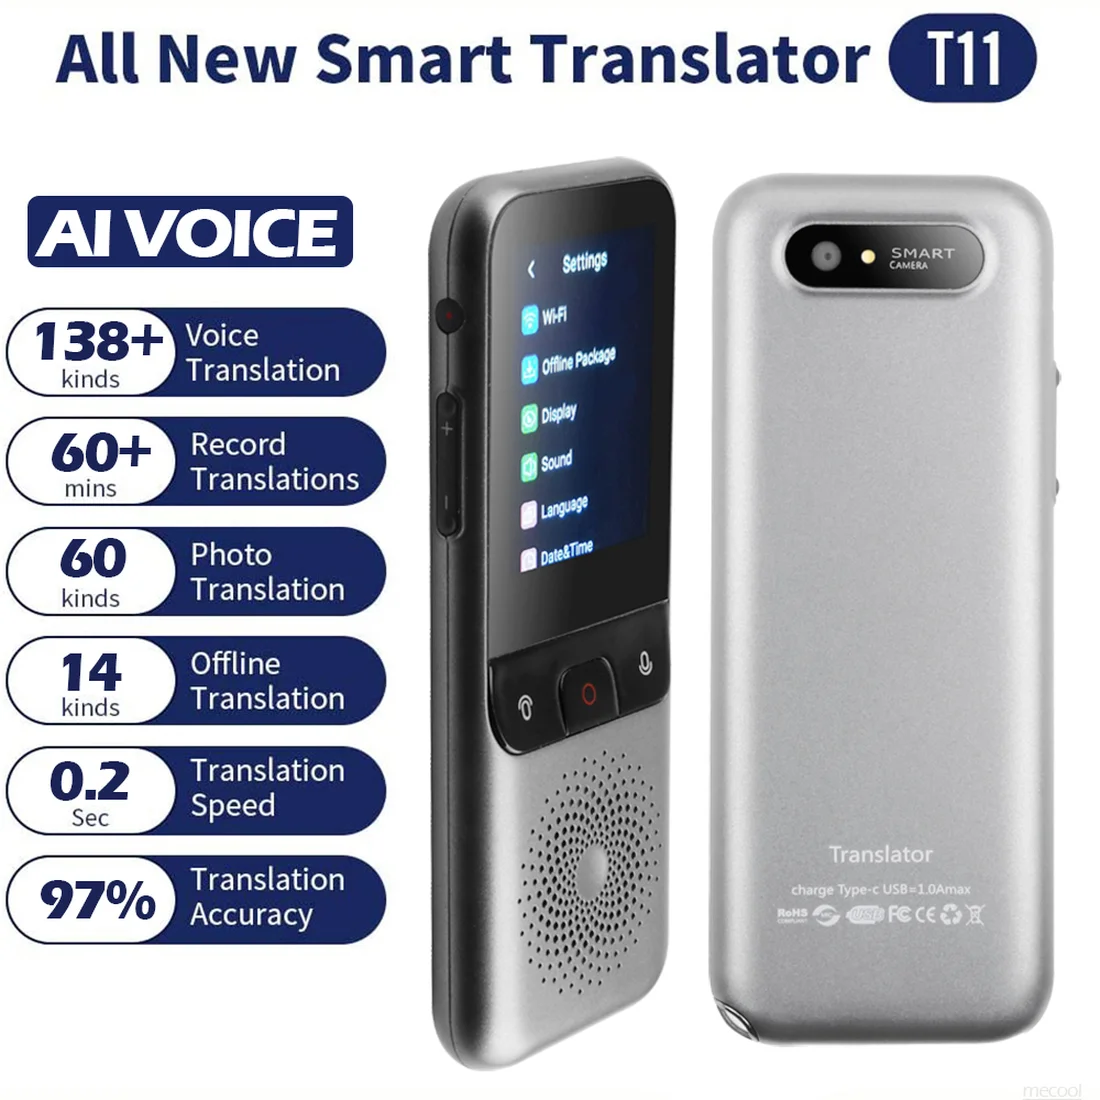 

The New T11 Portable Offline Online WIFI Intelligent Voice Translator 138 Multi-national Languages Children Learn Efficiently